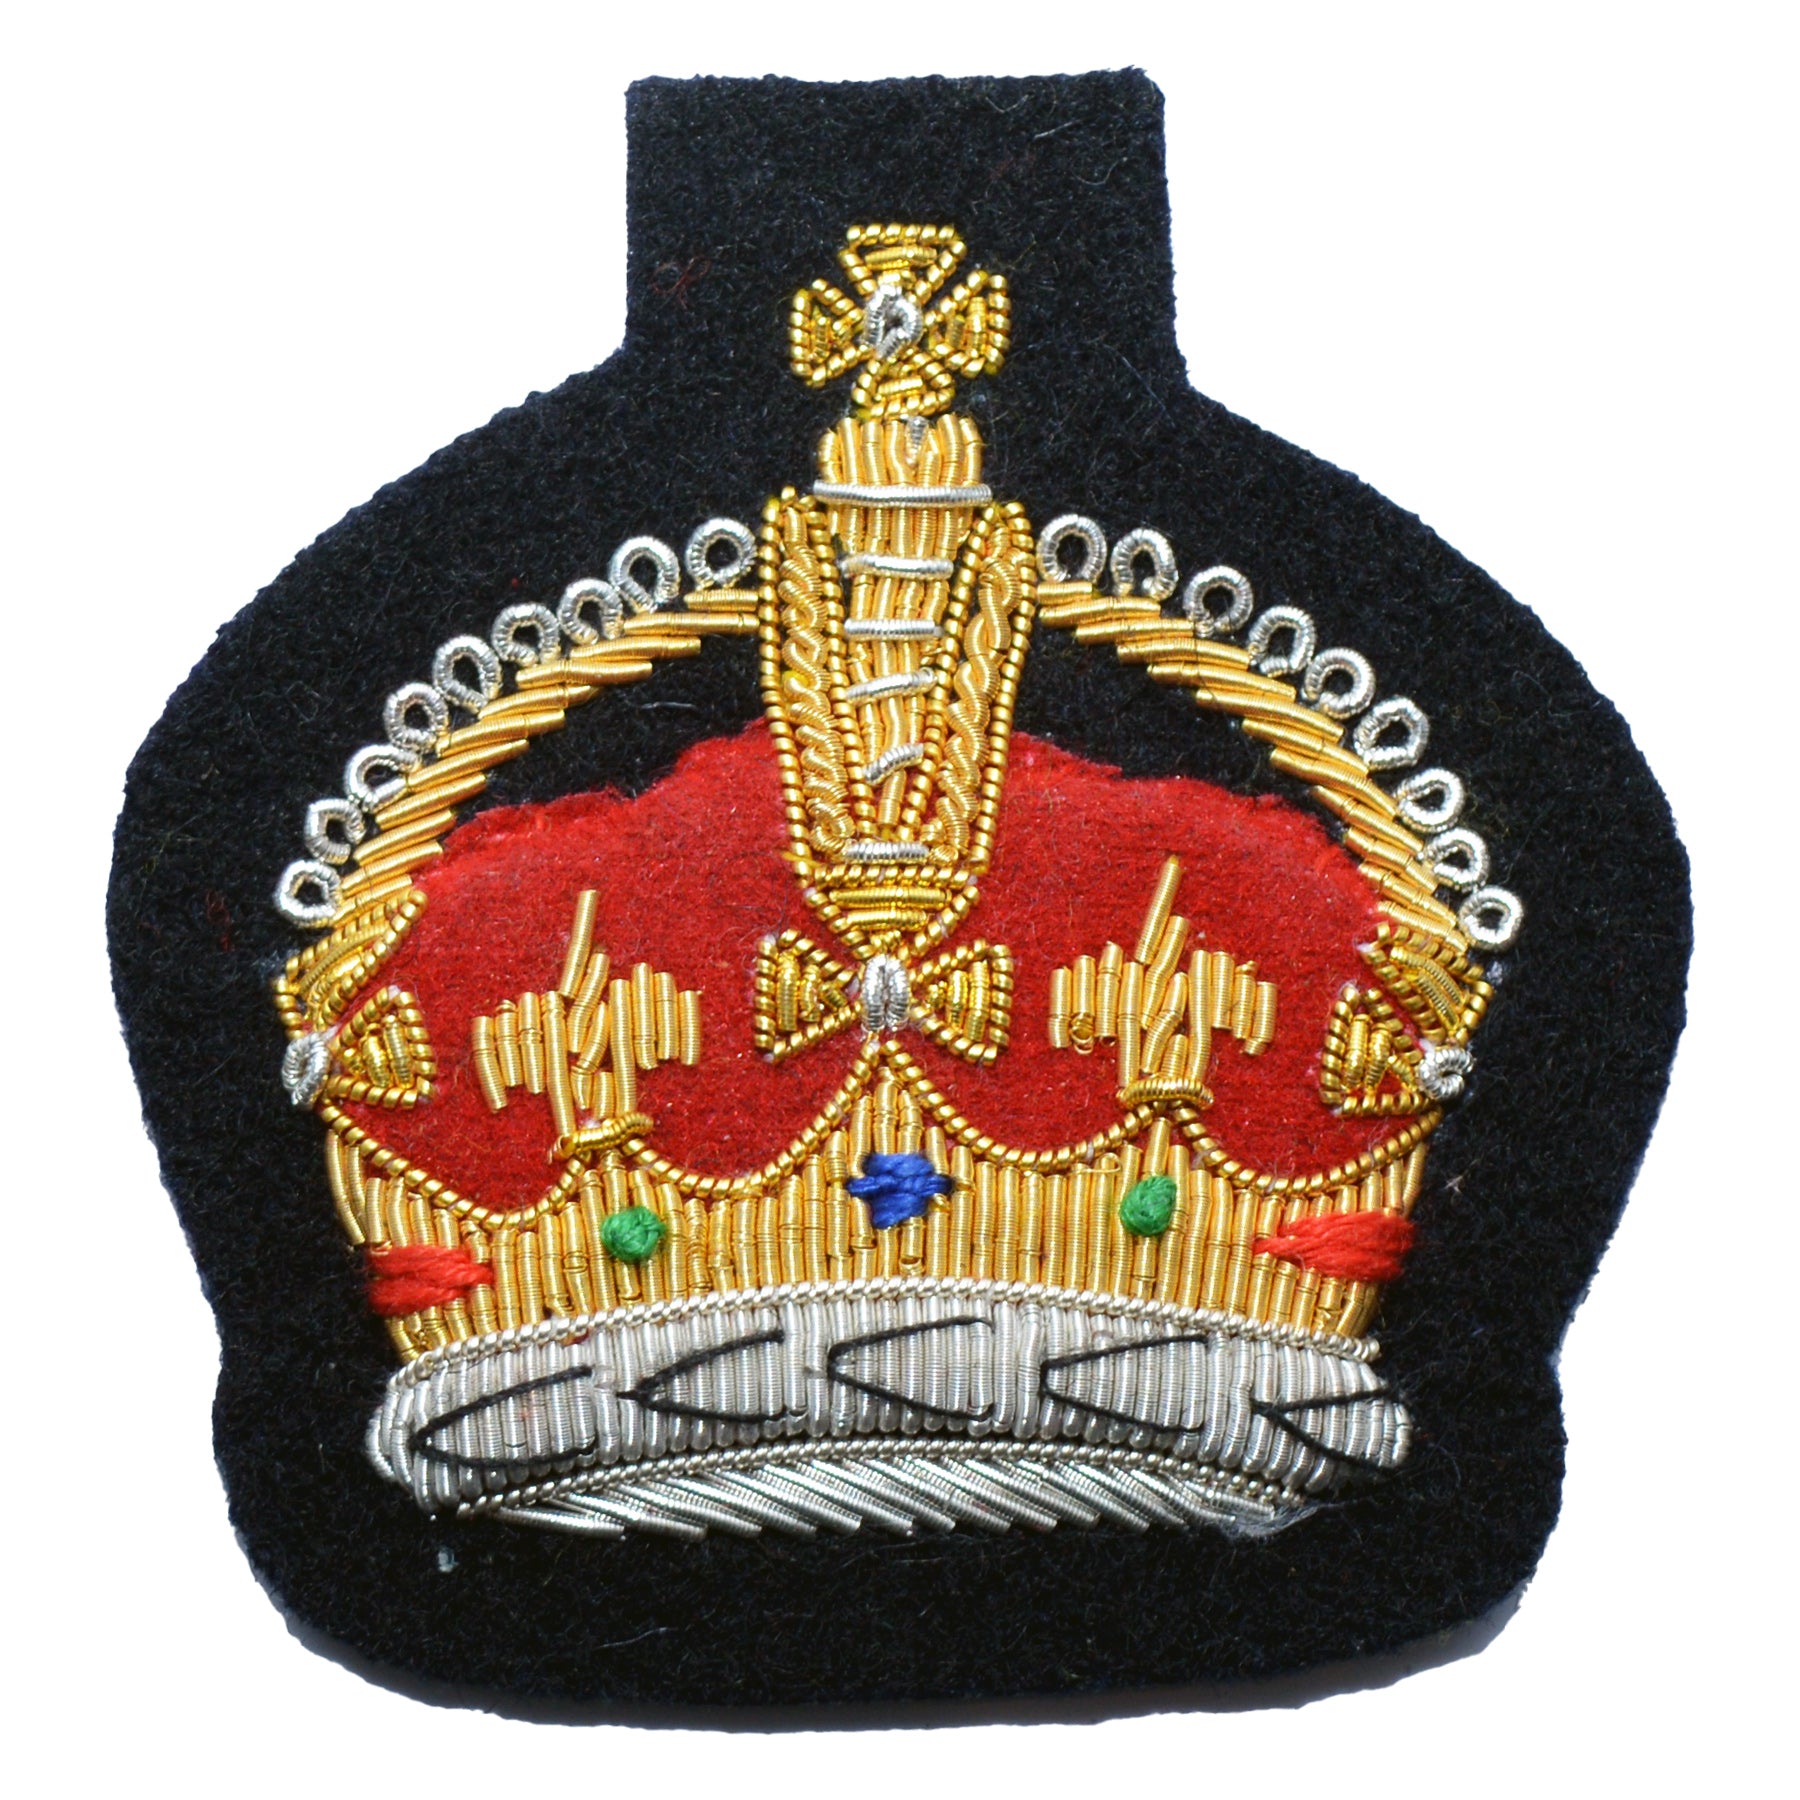 (King's Crown) Royal Hospital Chelsea Large Crown Rank Badge Warrant Officer Class 2 (WO2) and NCO British Army